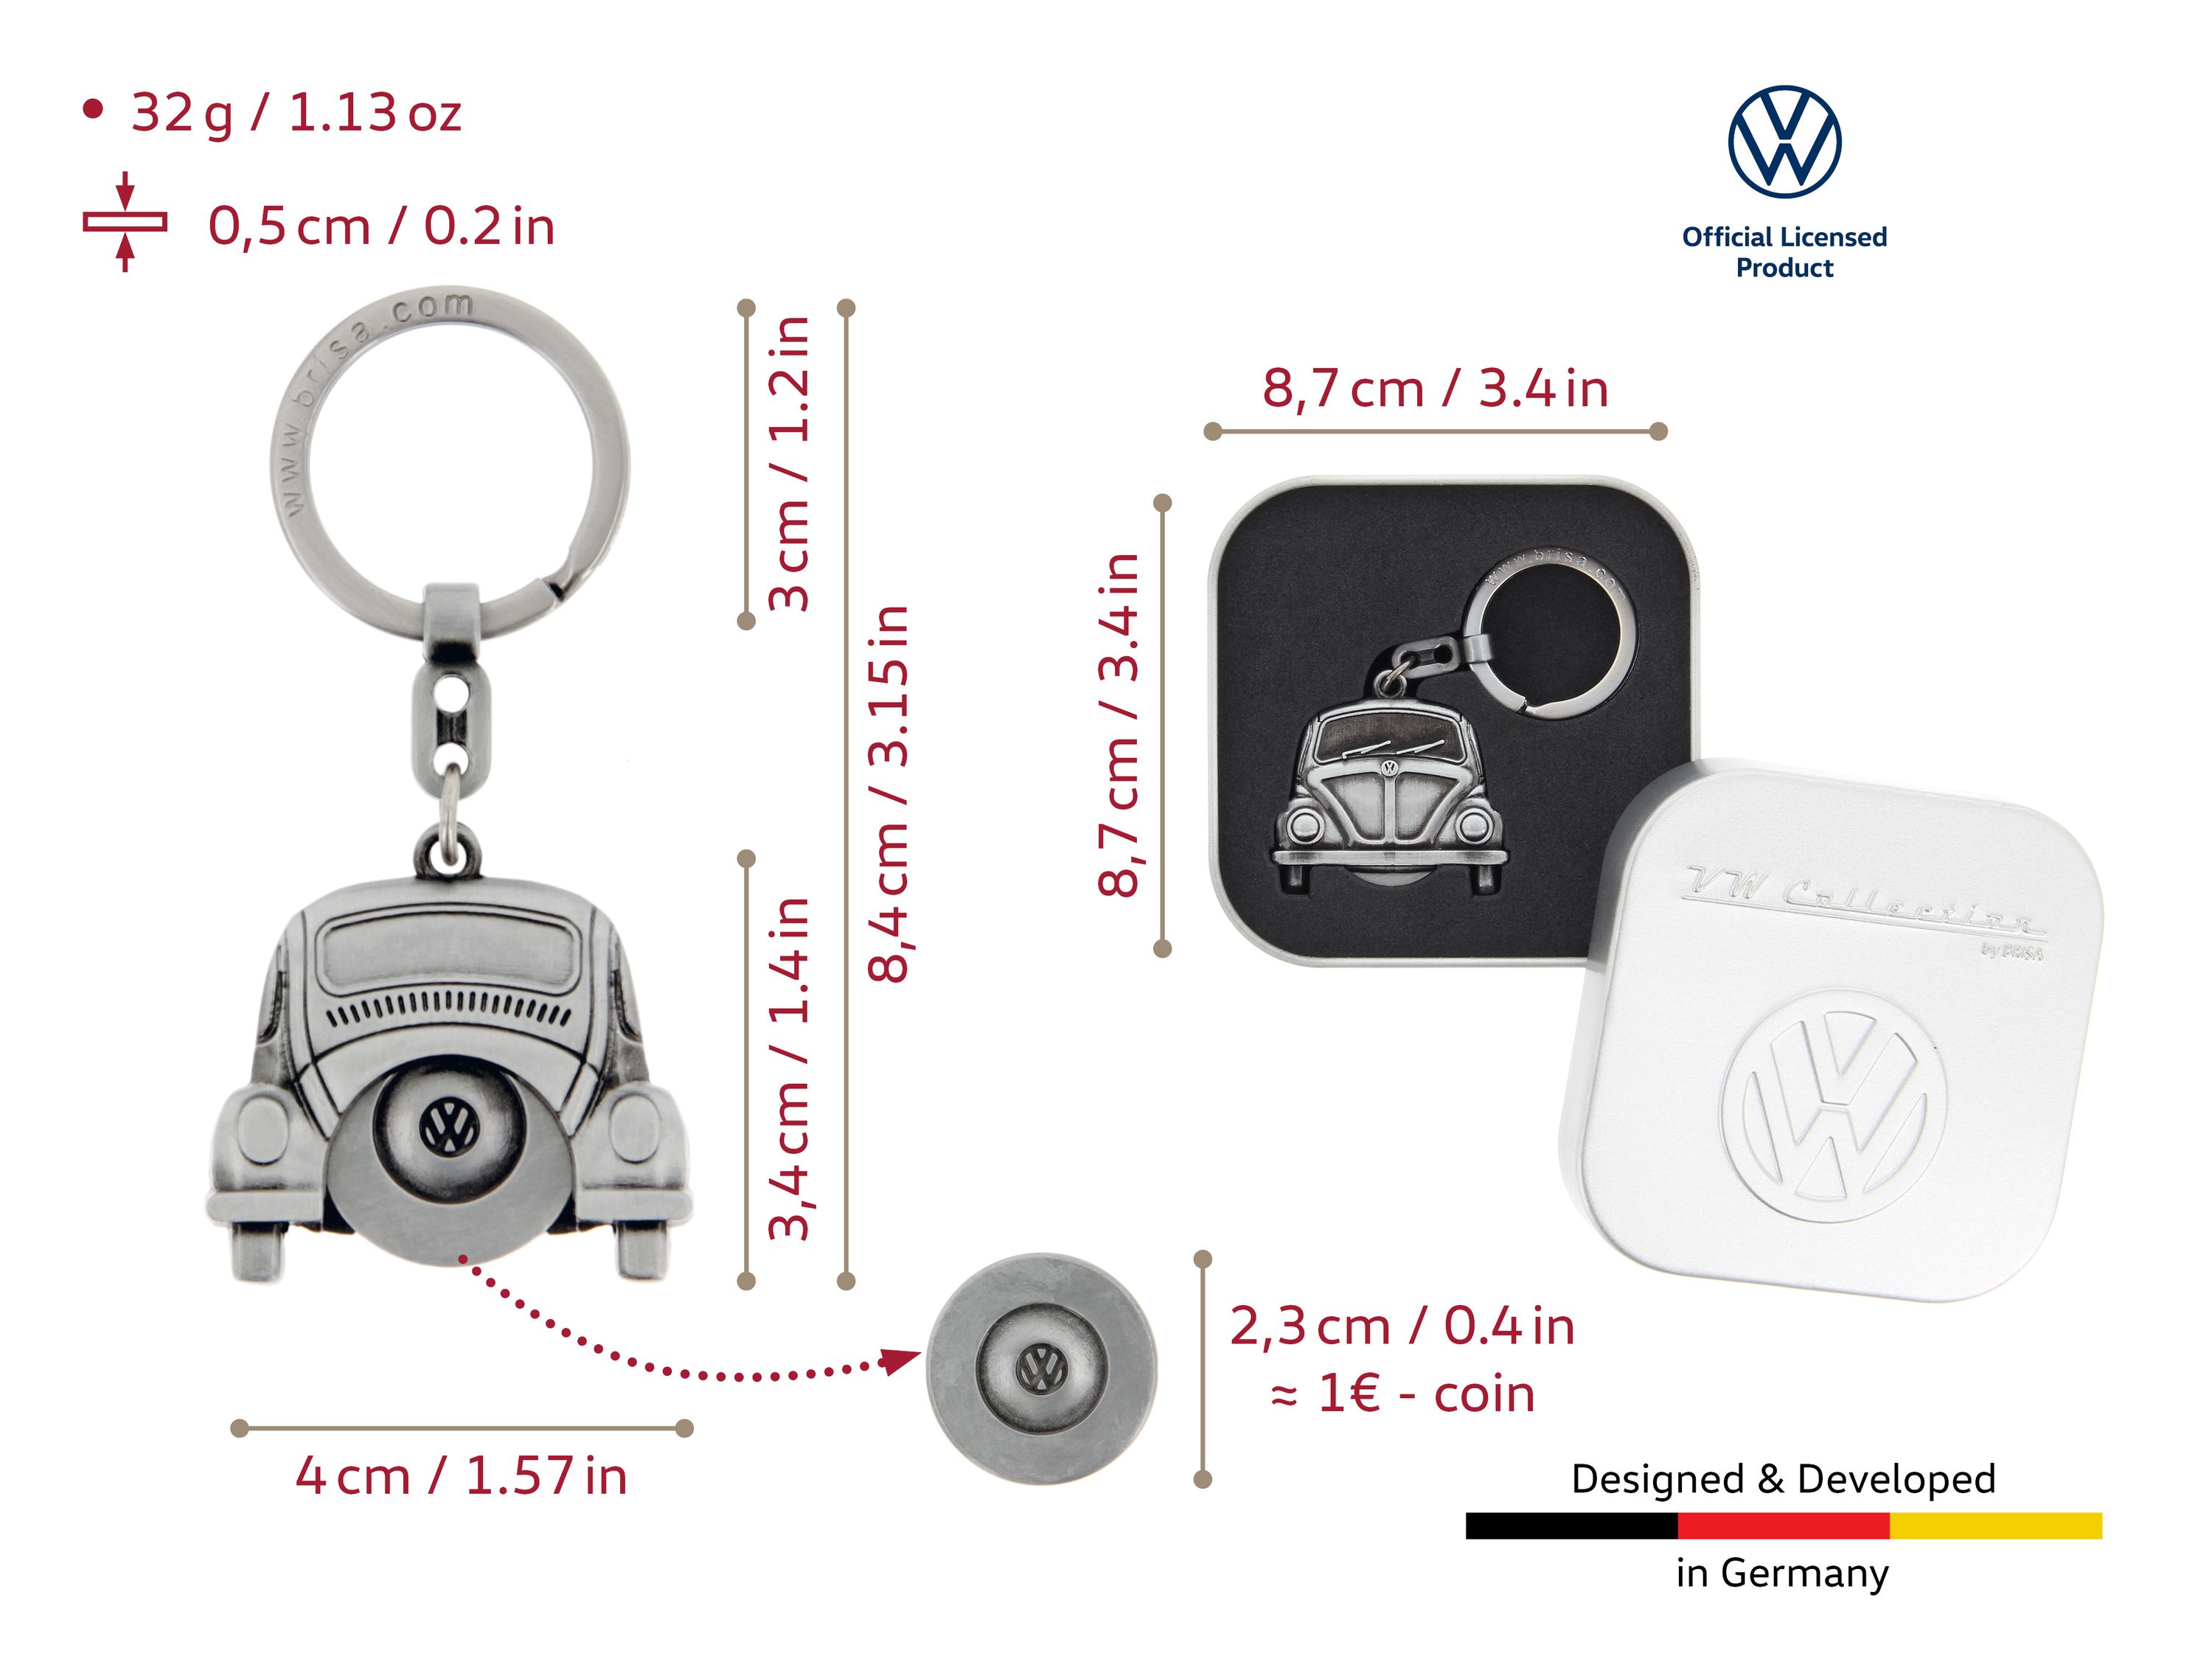 VW Beetle key ring with shopping cart chip in gift box - antique silver look